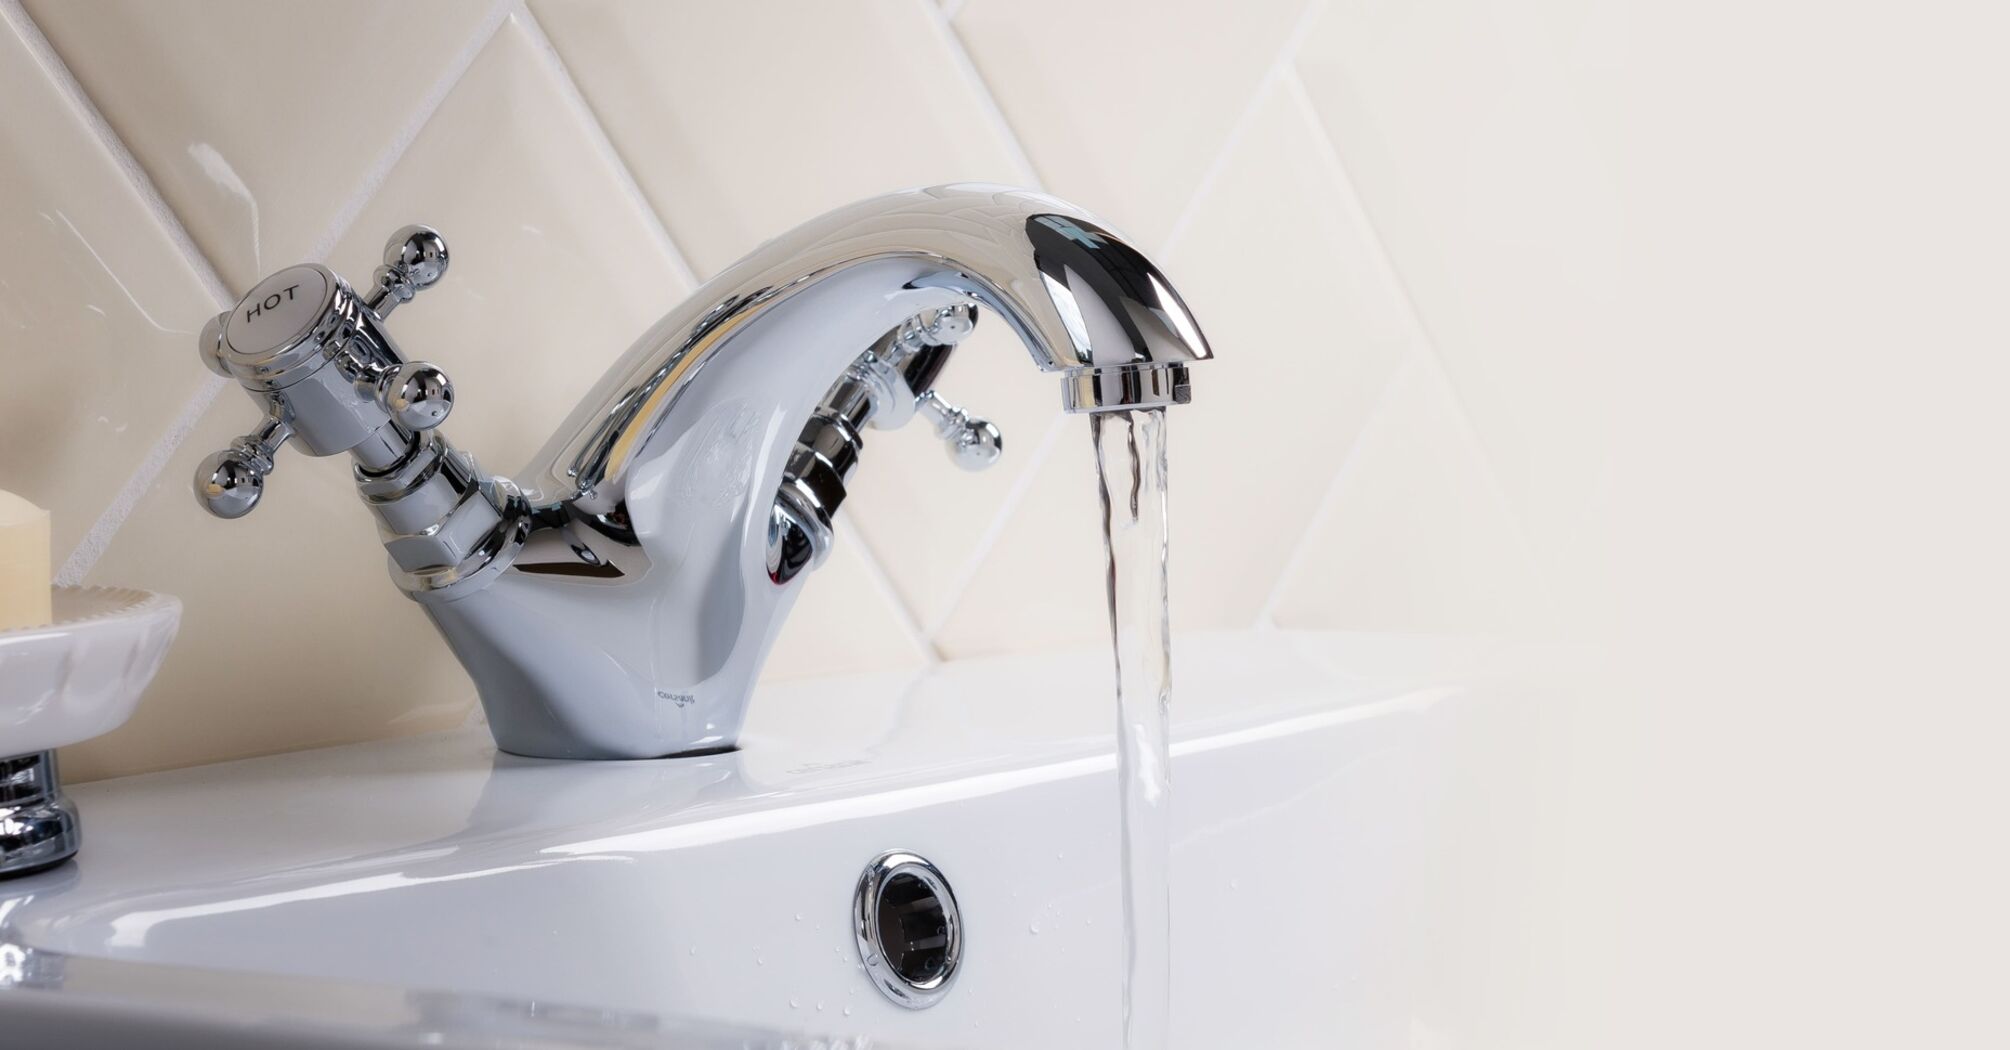 How to clean bathroom faucets from limescale: simple but effective tips from experienced owners